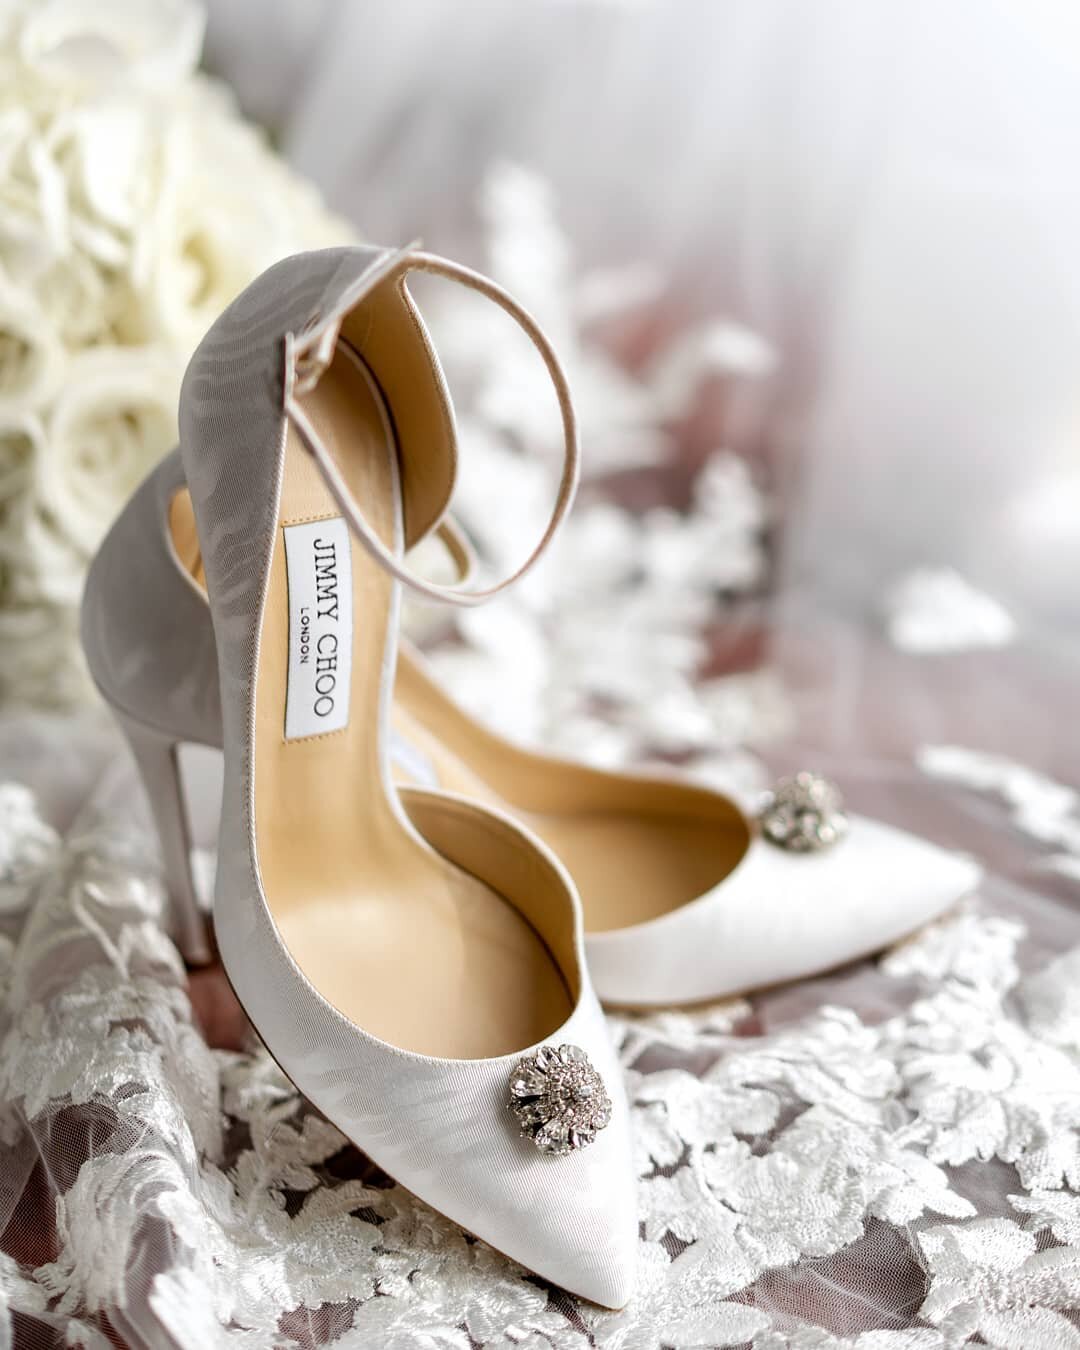 A bridal look isn't completely without the perfect pair of shoes 😍